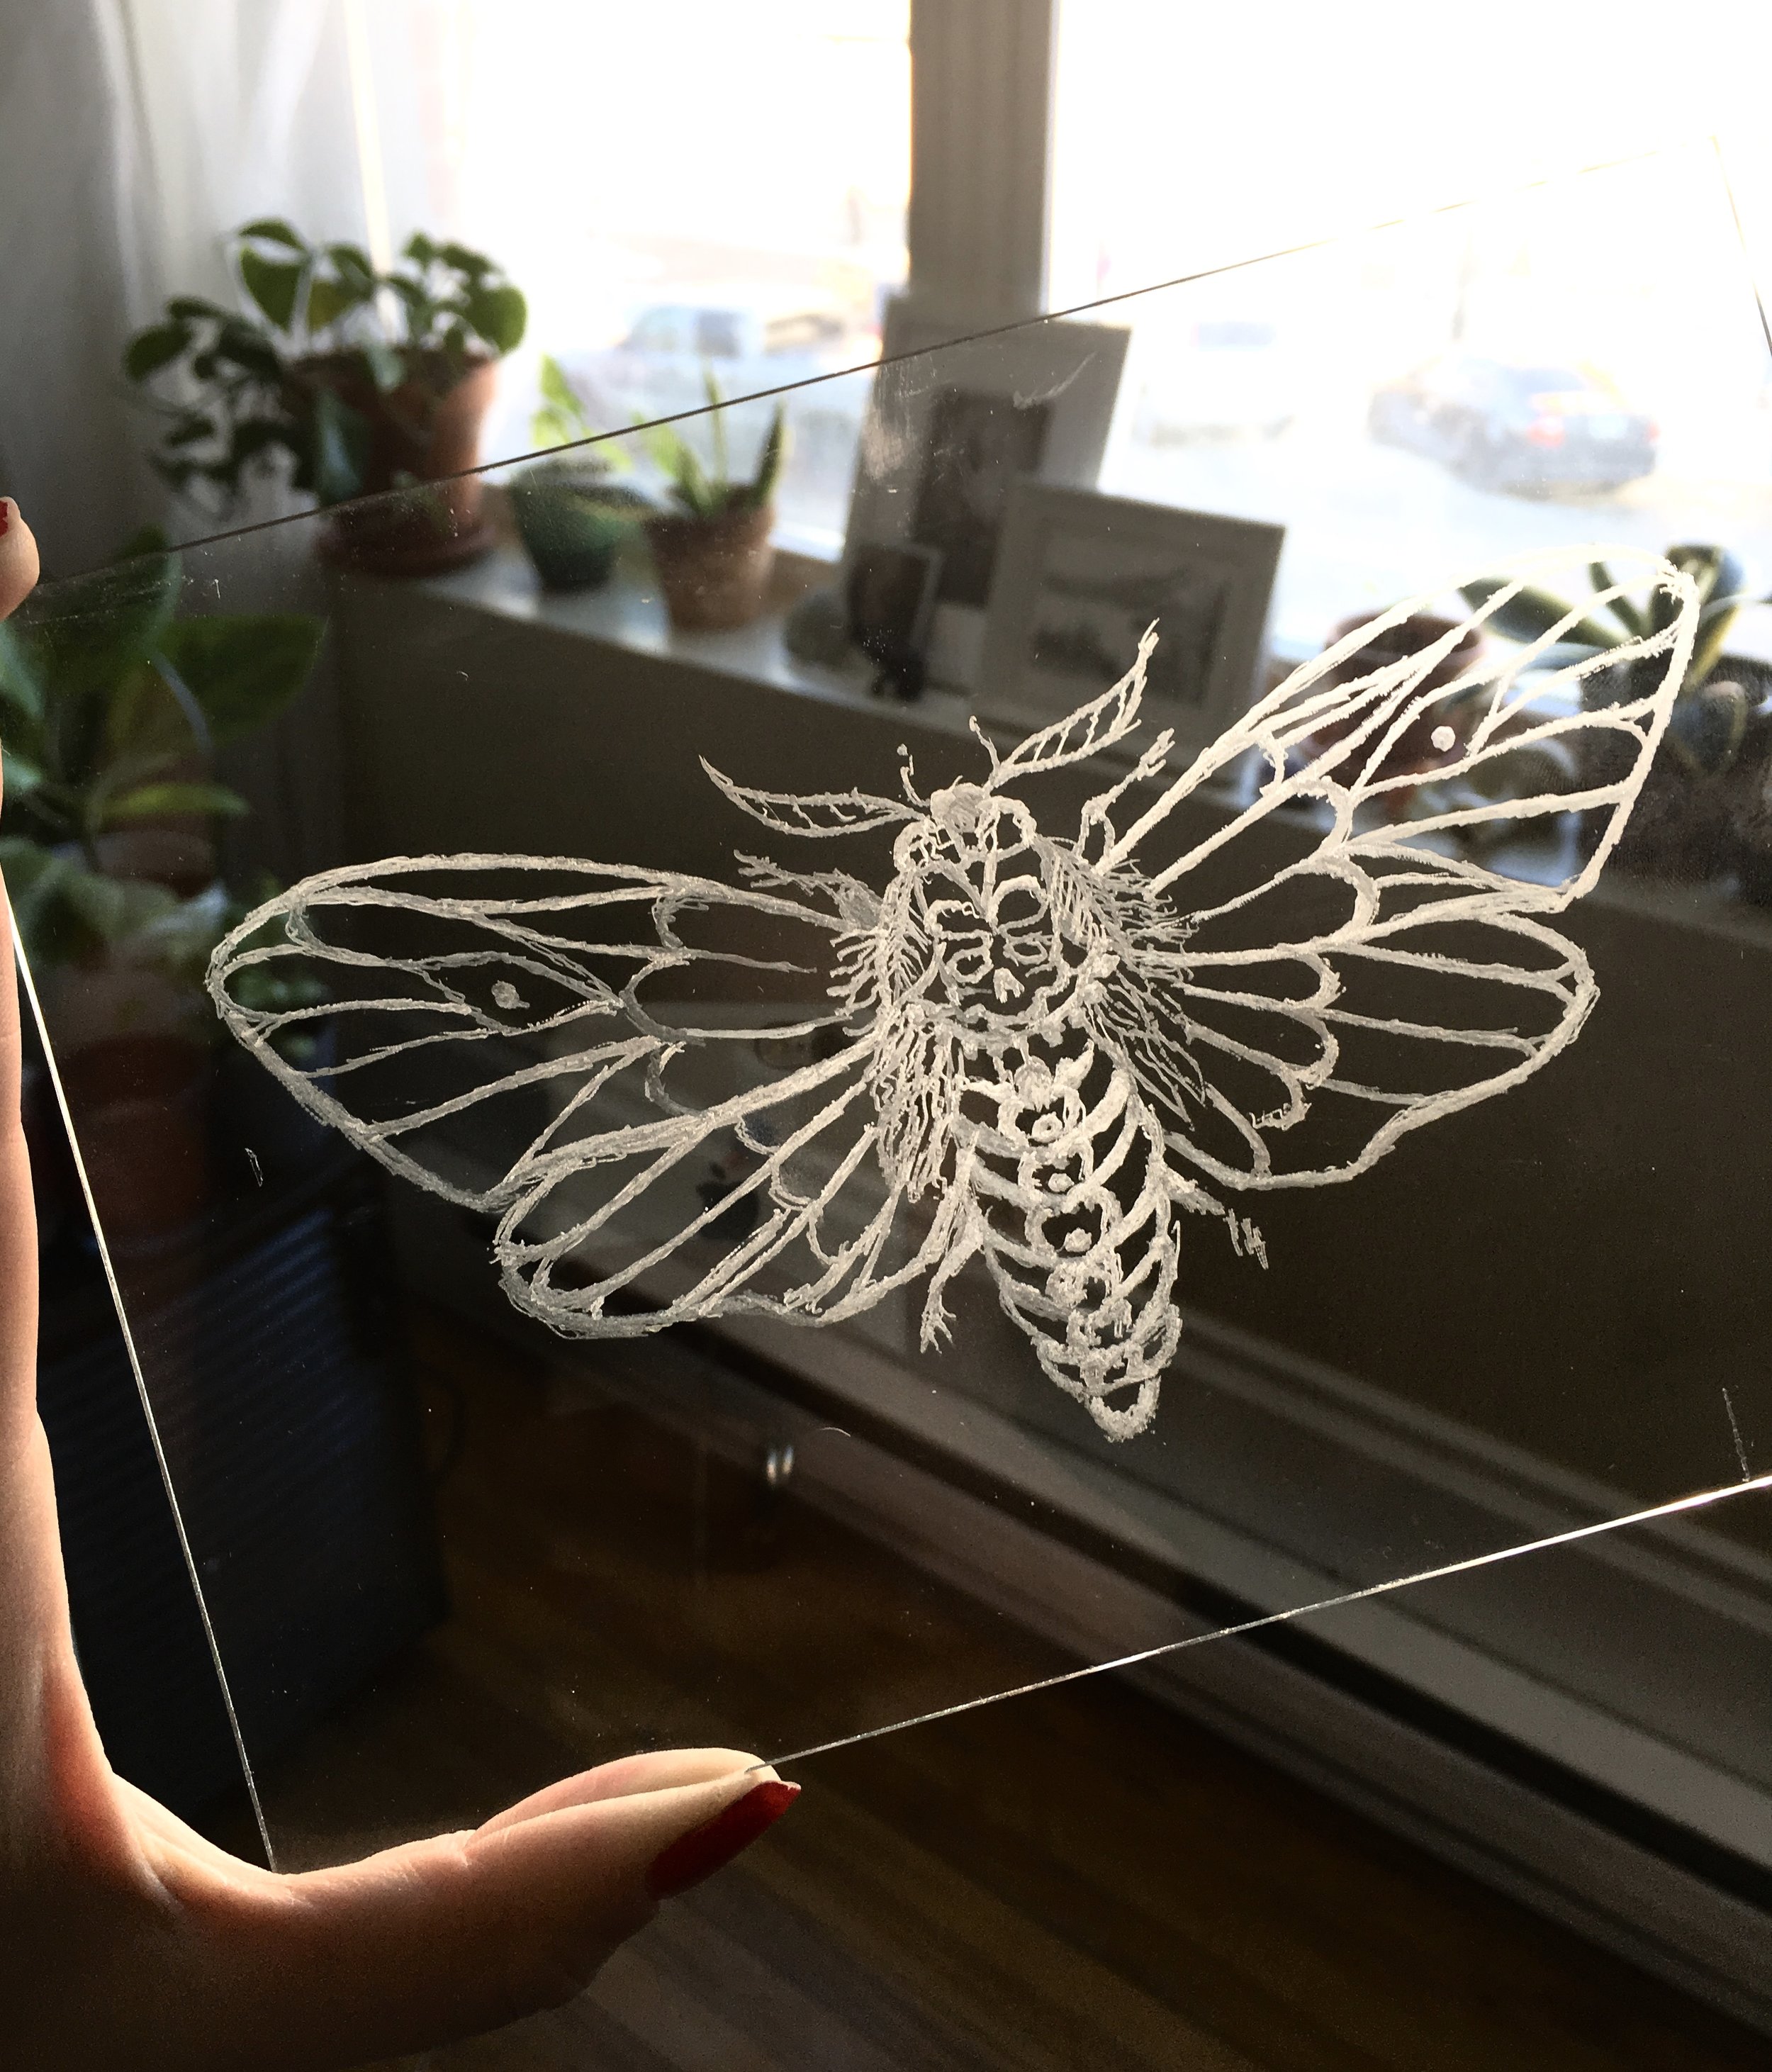 9 Easy Steps to Create Beautiful Glass Etching Designs